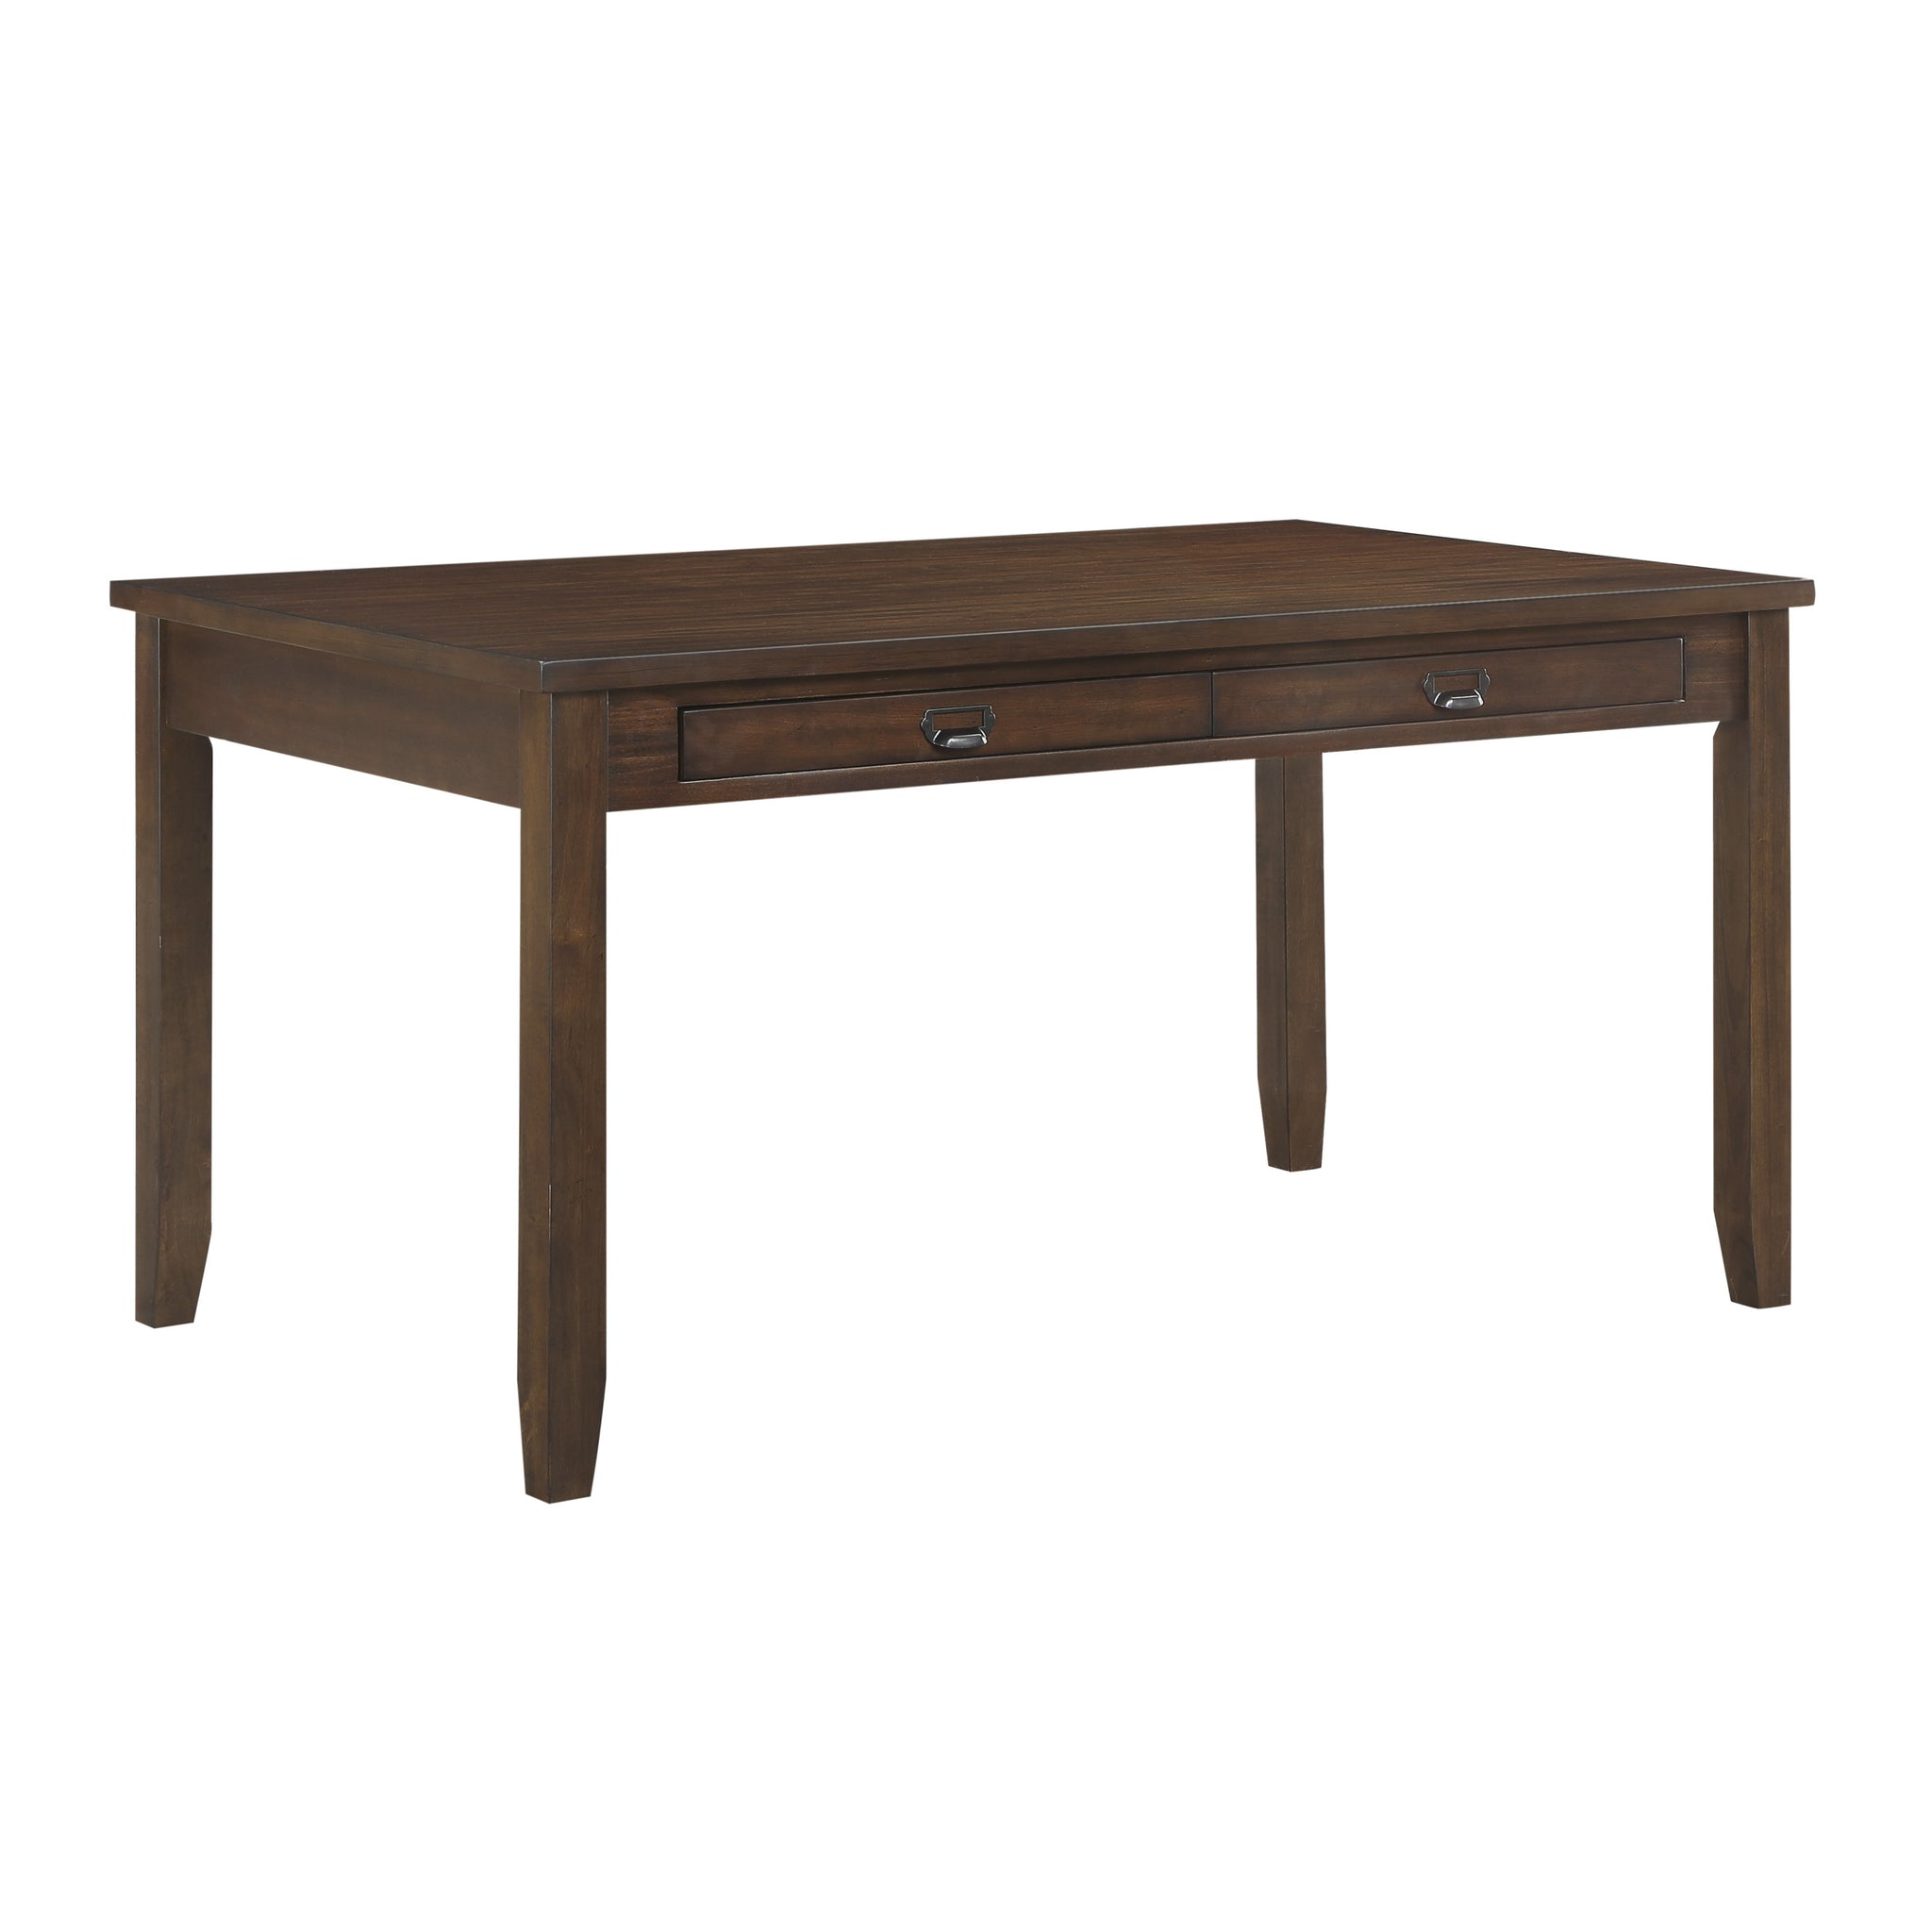 Dark Cherry Finish Dining Table with 4 Drawers 1pc cherry-seats 6-dining room-kitchen & dining